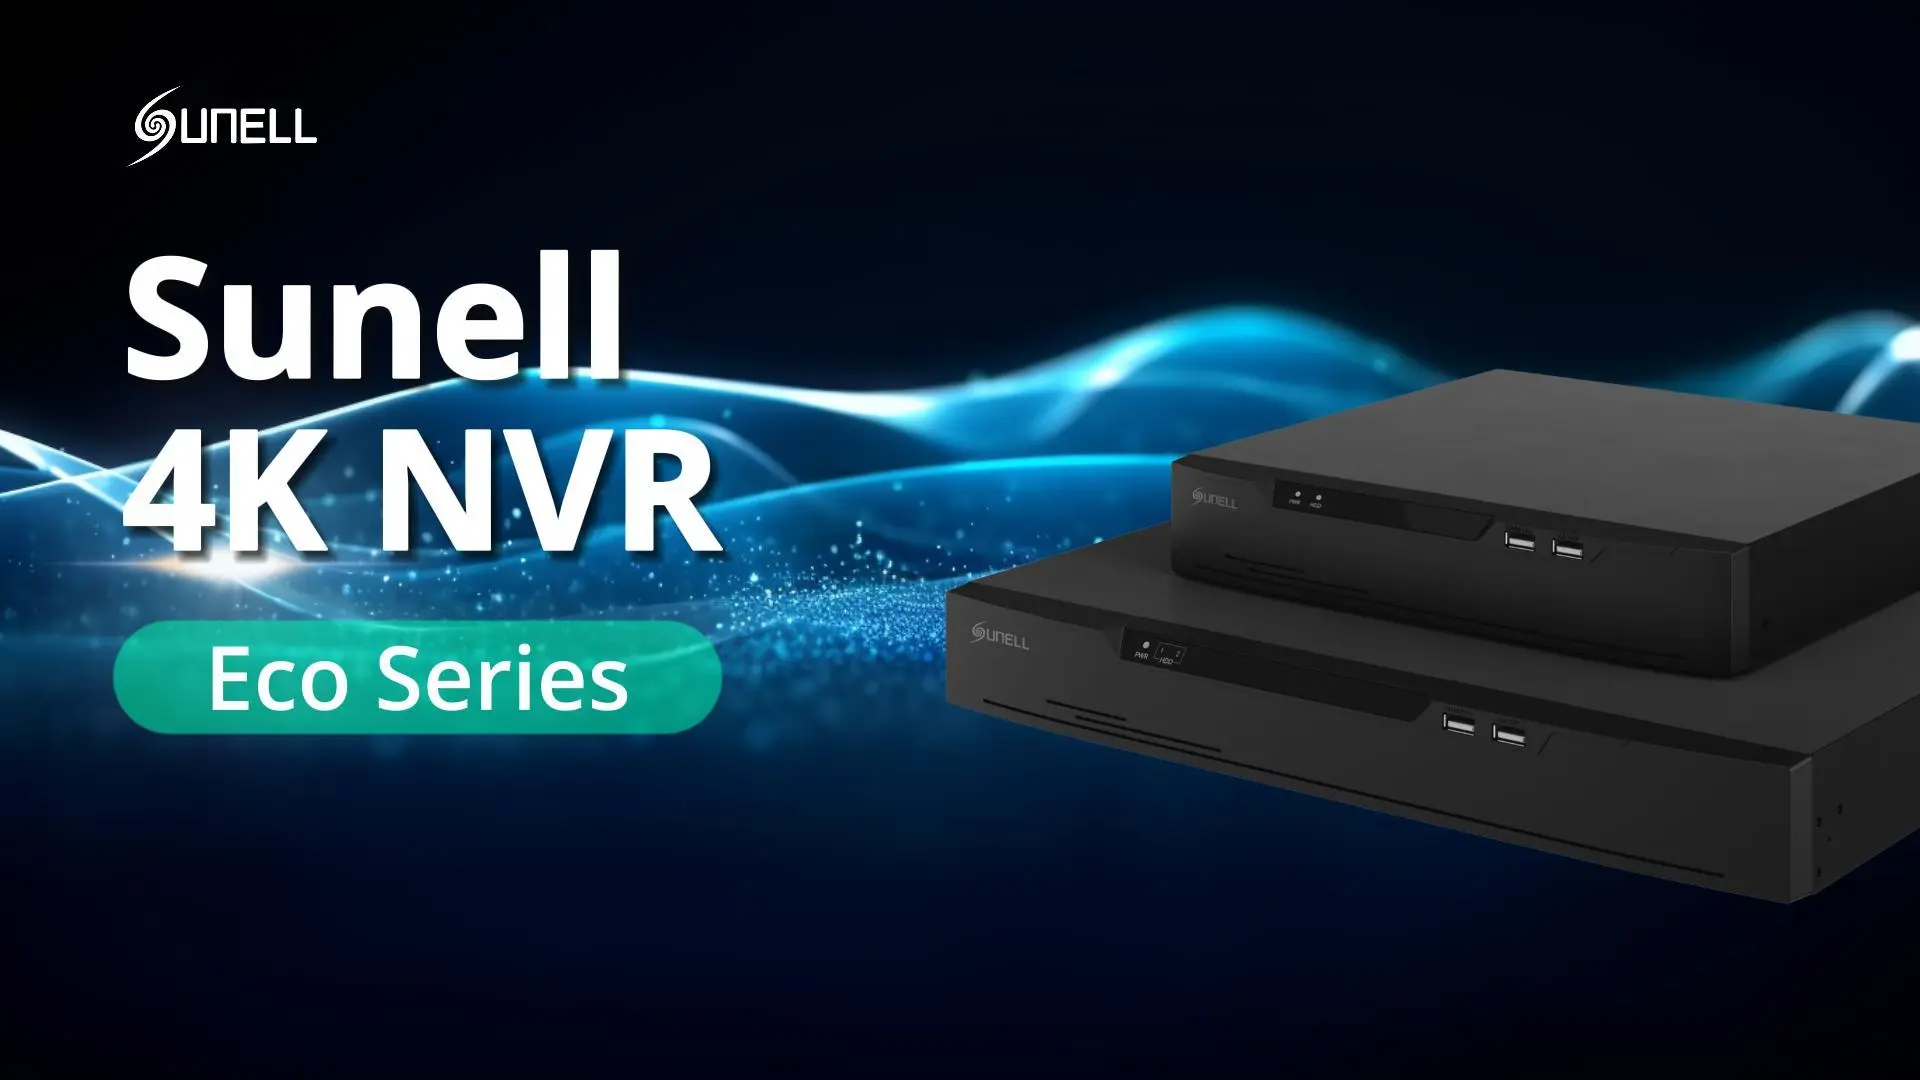 Sunell Eco Series NVR mit vollem Funktionsumfang Anleitung